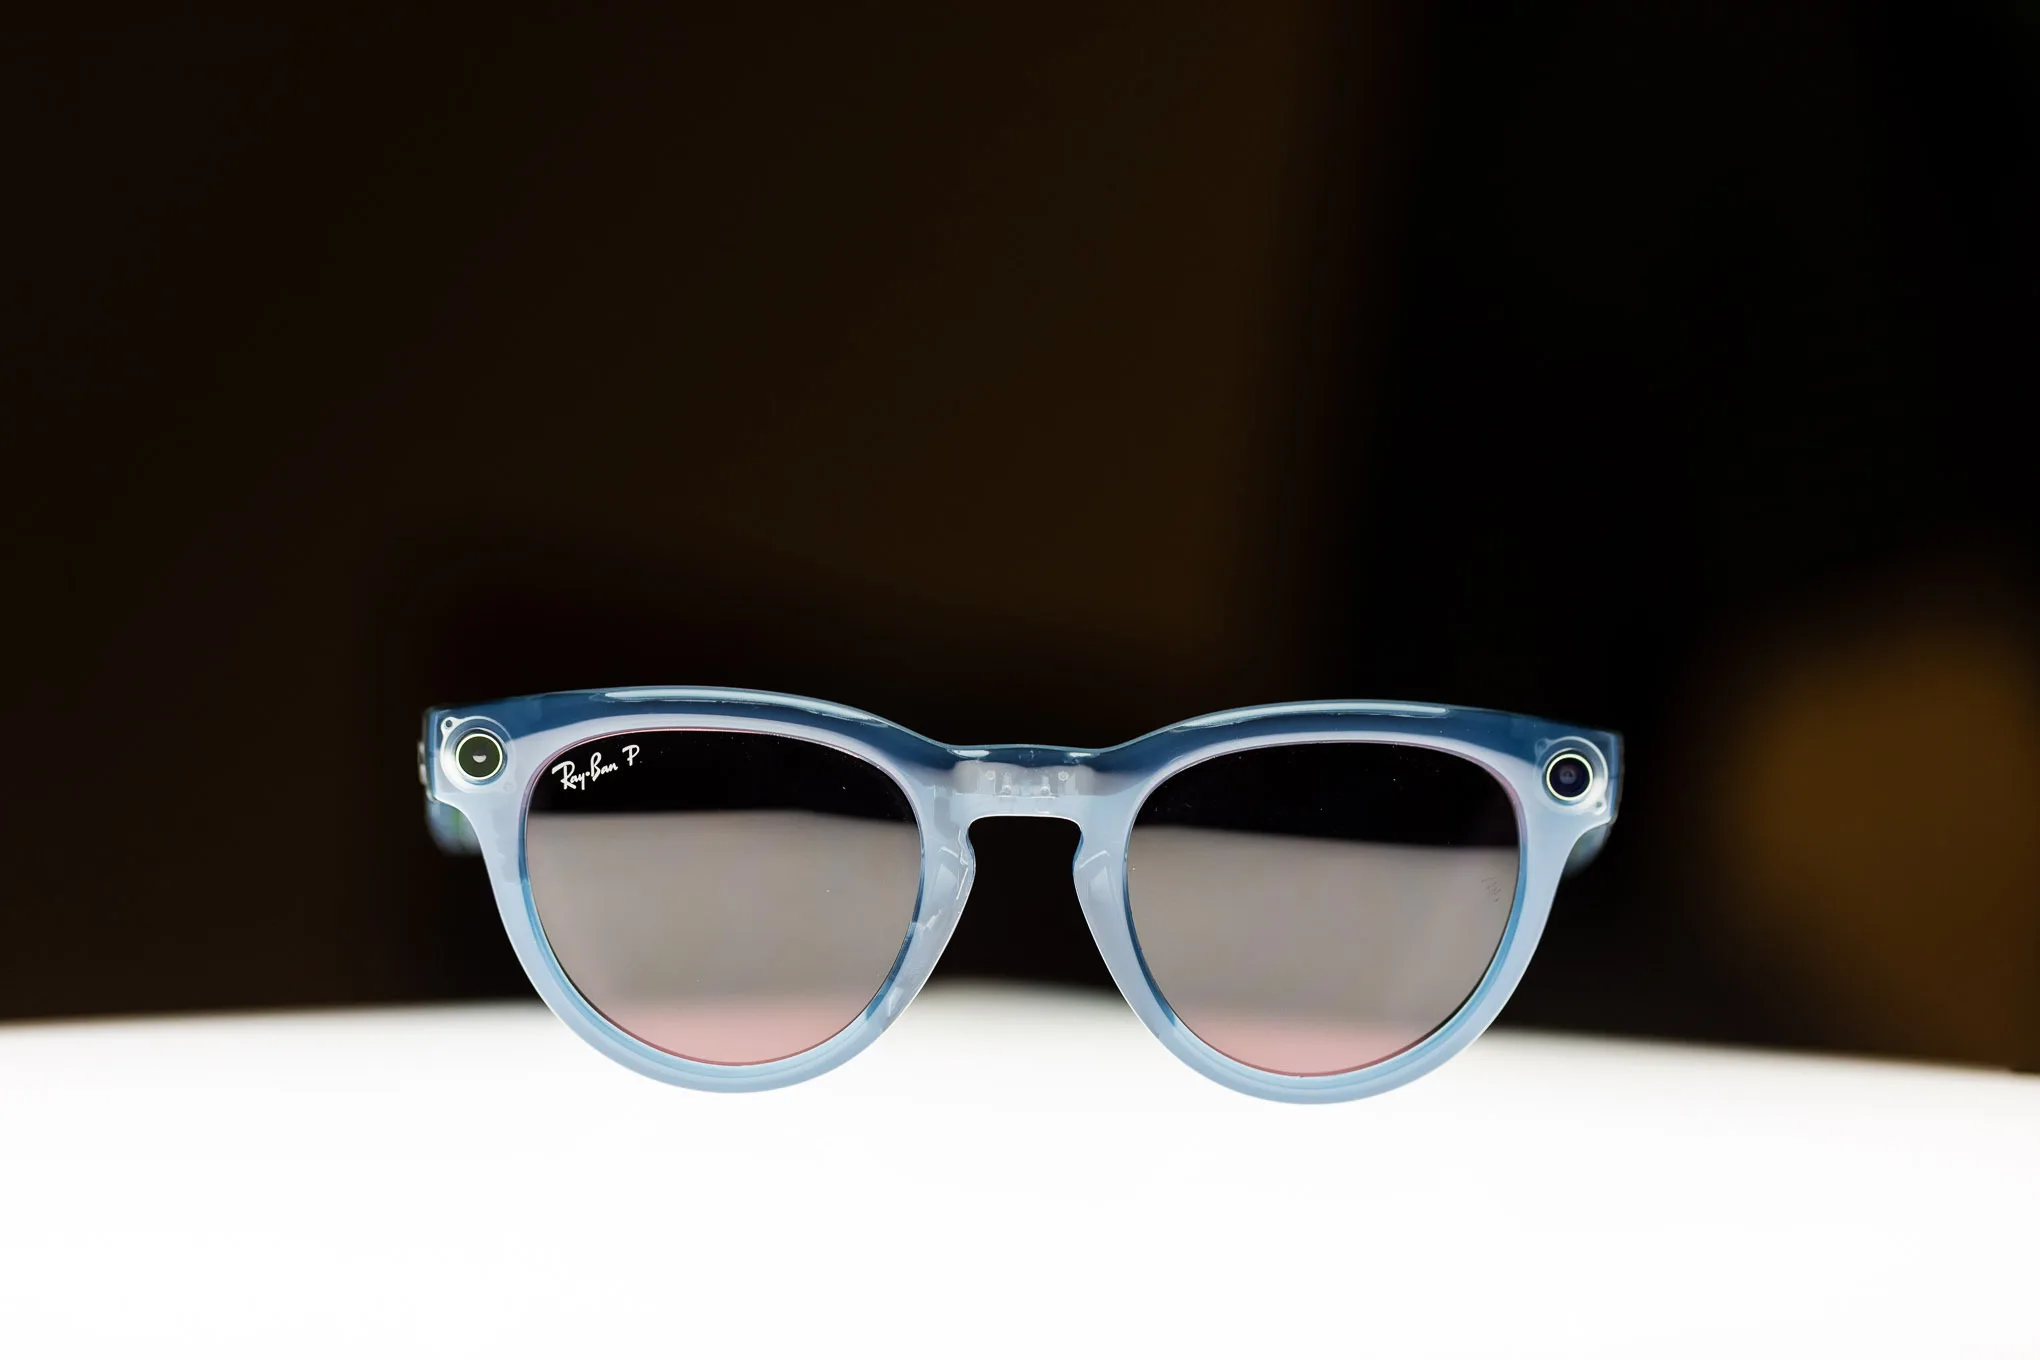 Meta's Ray-Ban Face cameras work well with smart eyewear